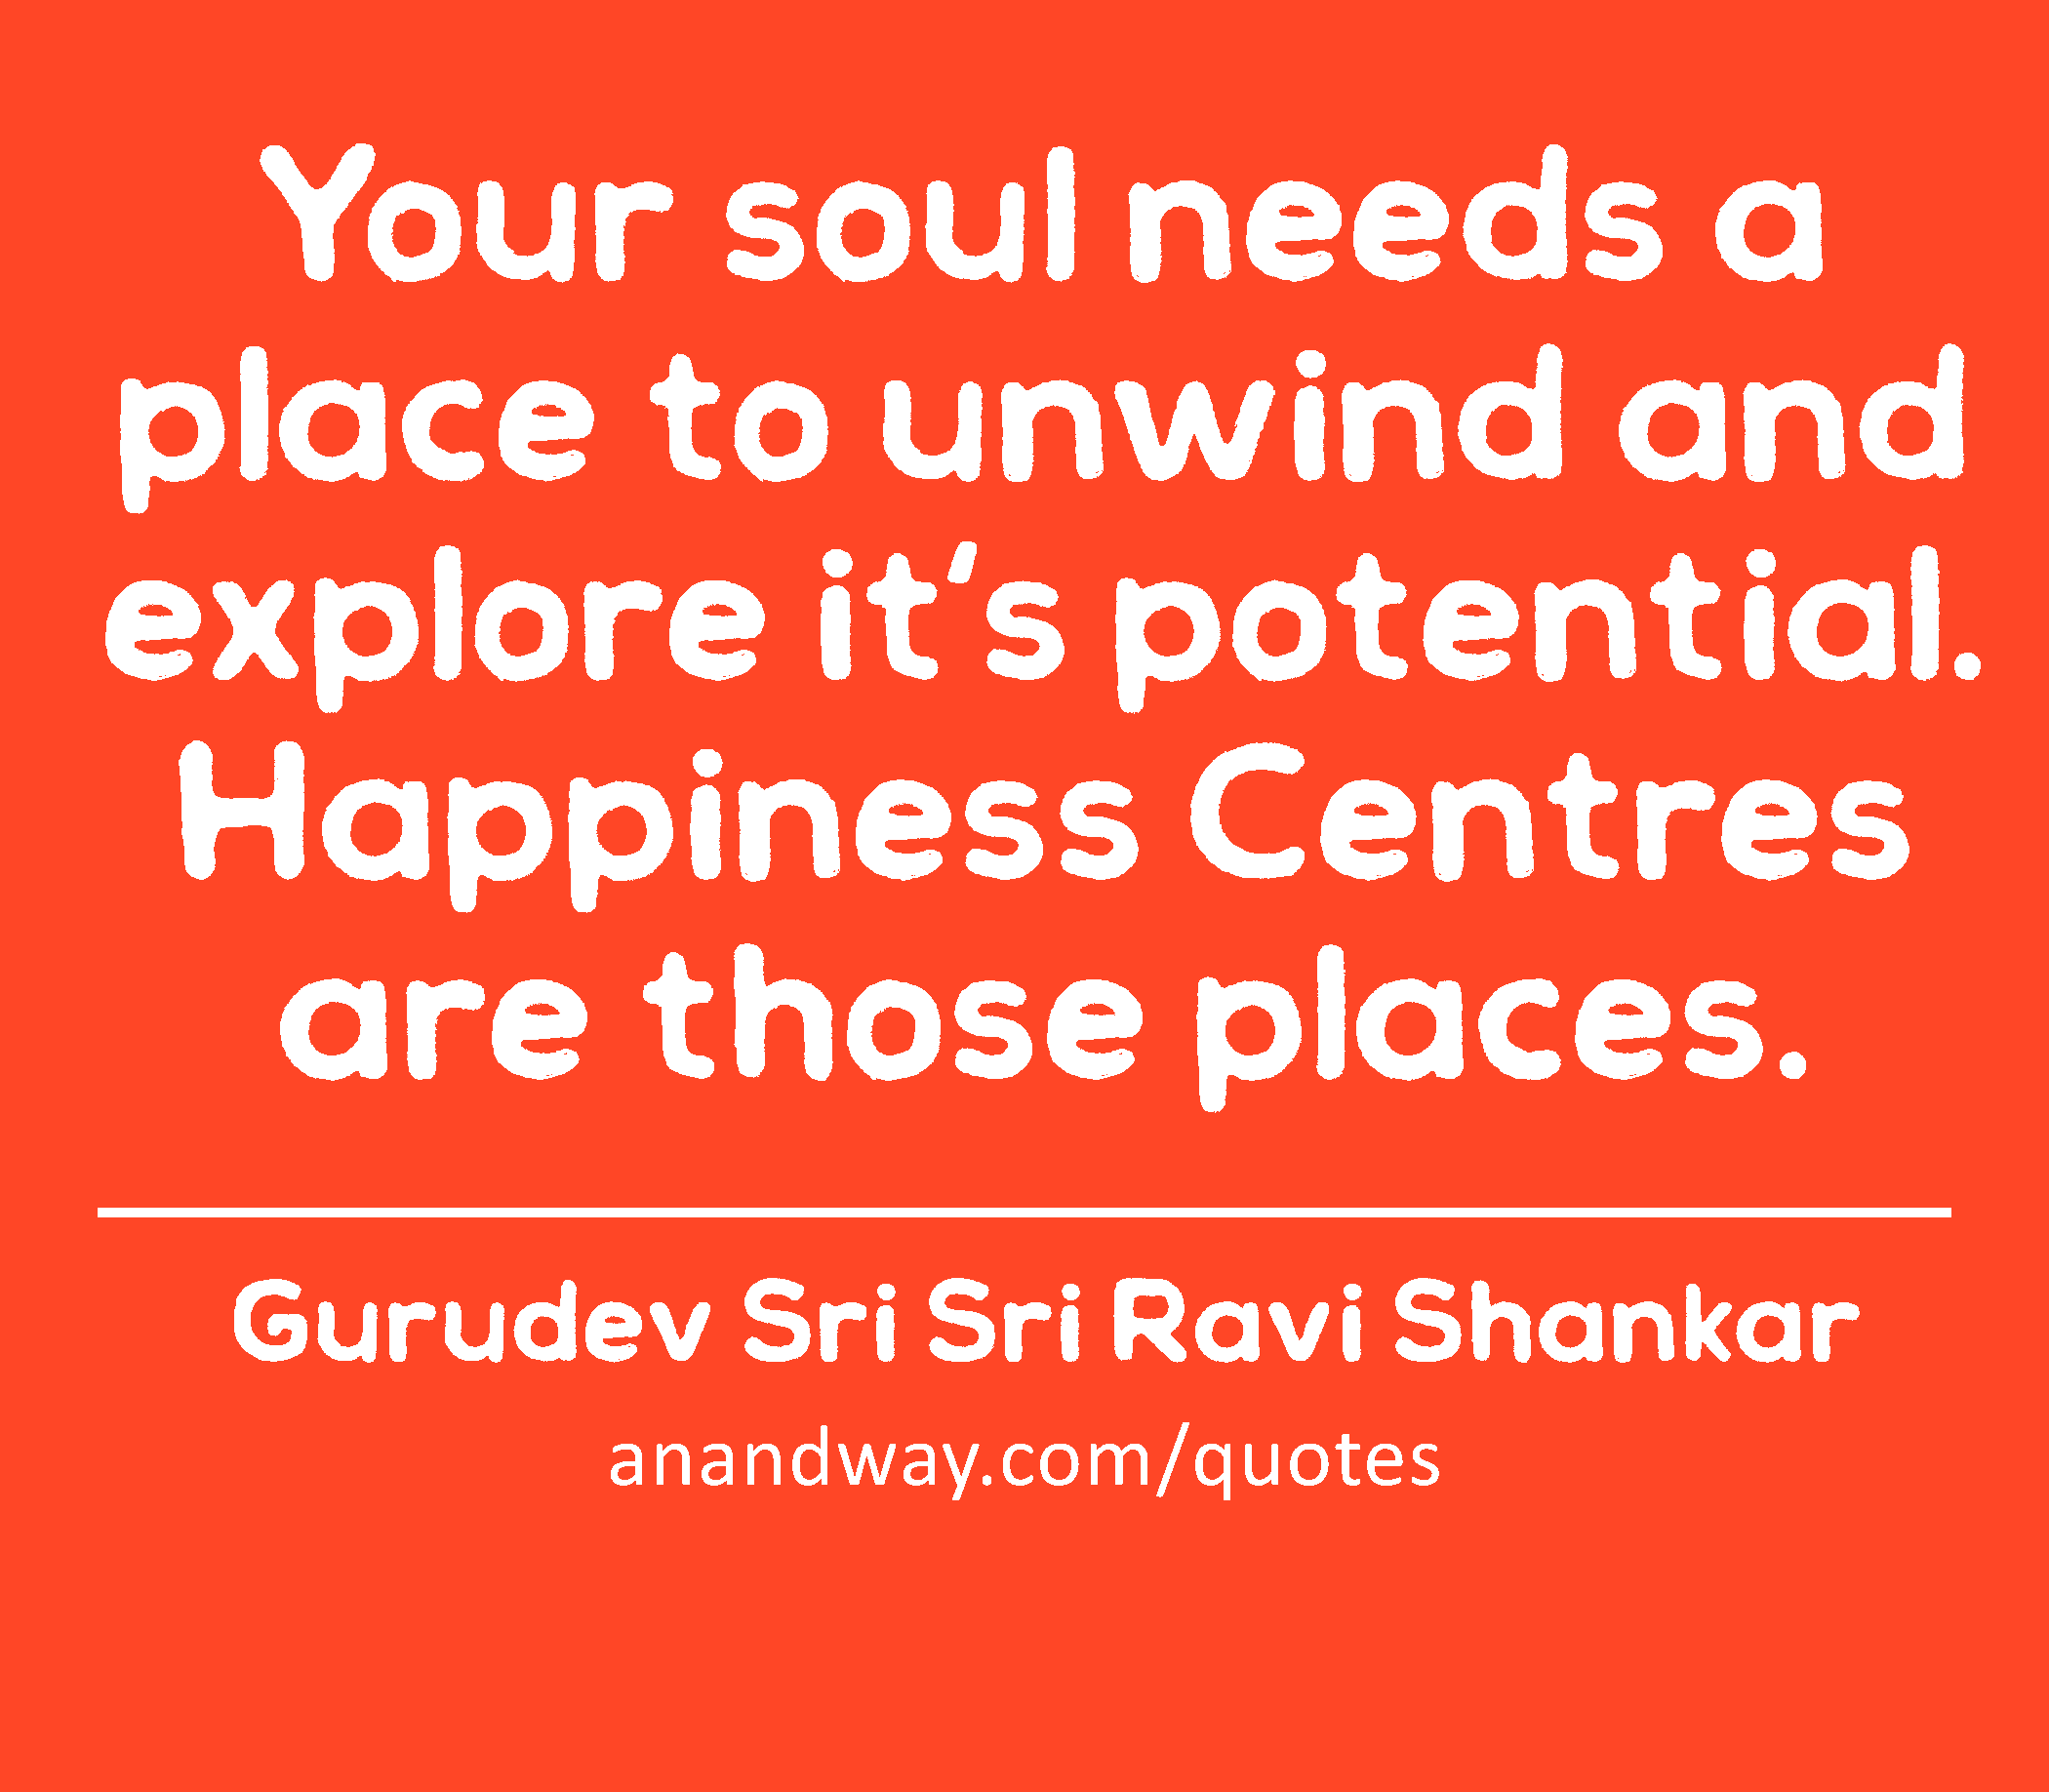 Your soul needs a place to unwind and explore it's potential. Happiness Centres are those places. 
 -Gurudev Sri Sri Ravi Shankar